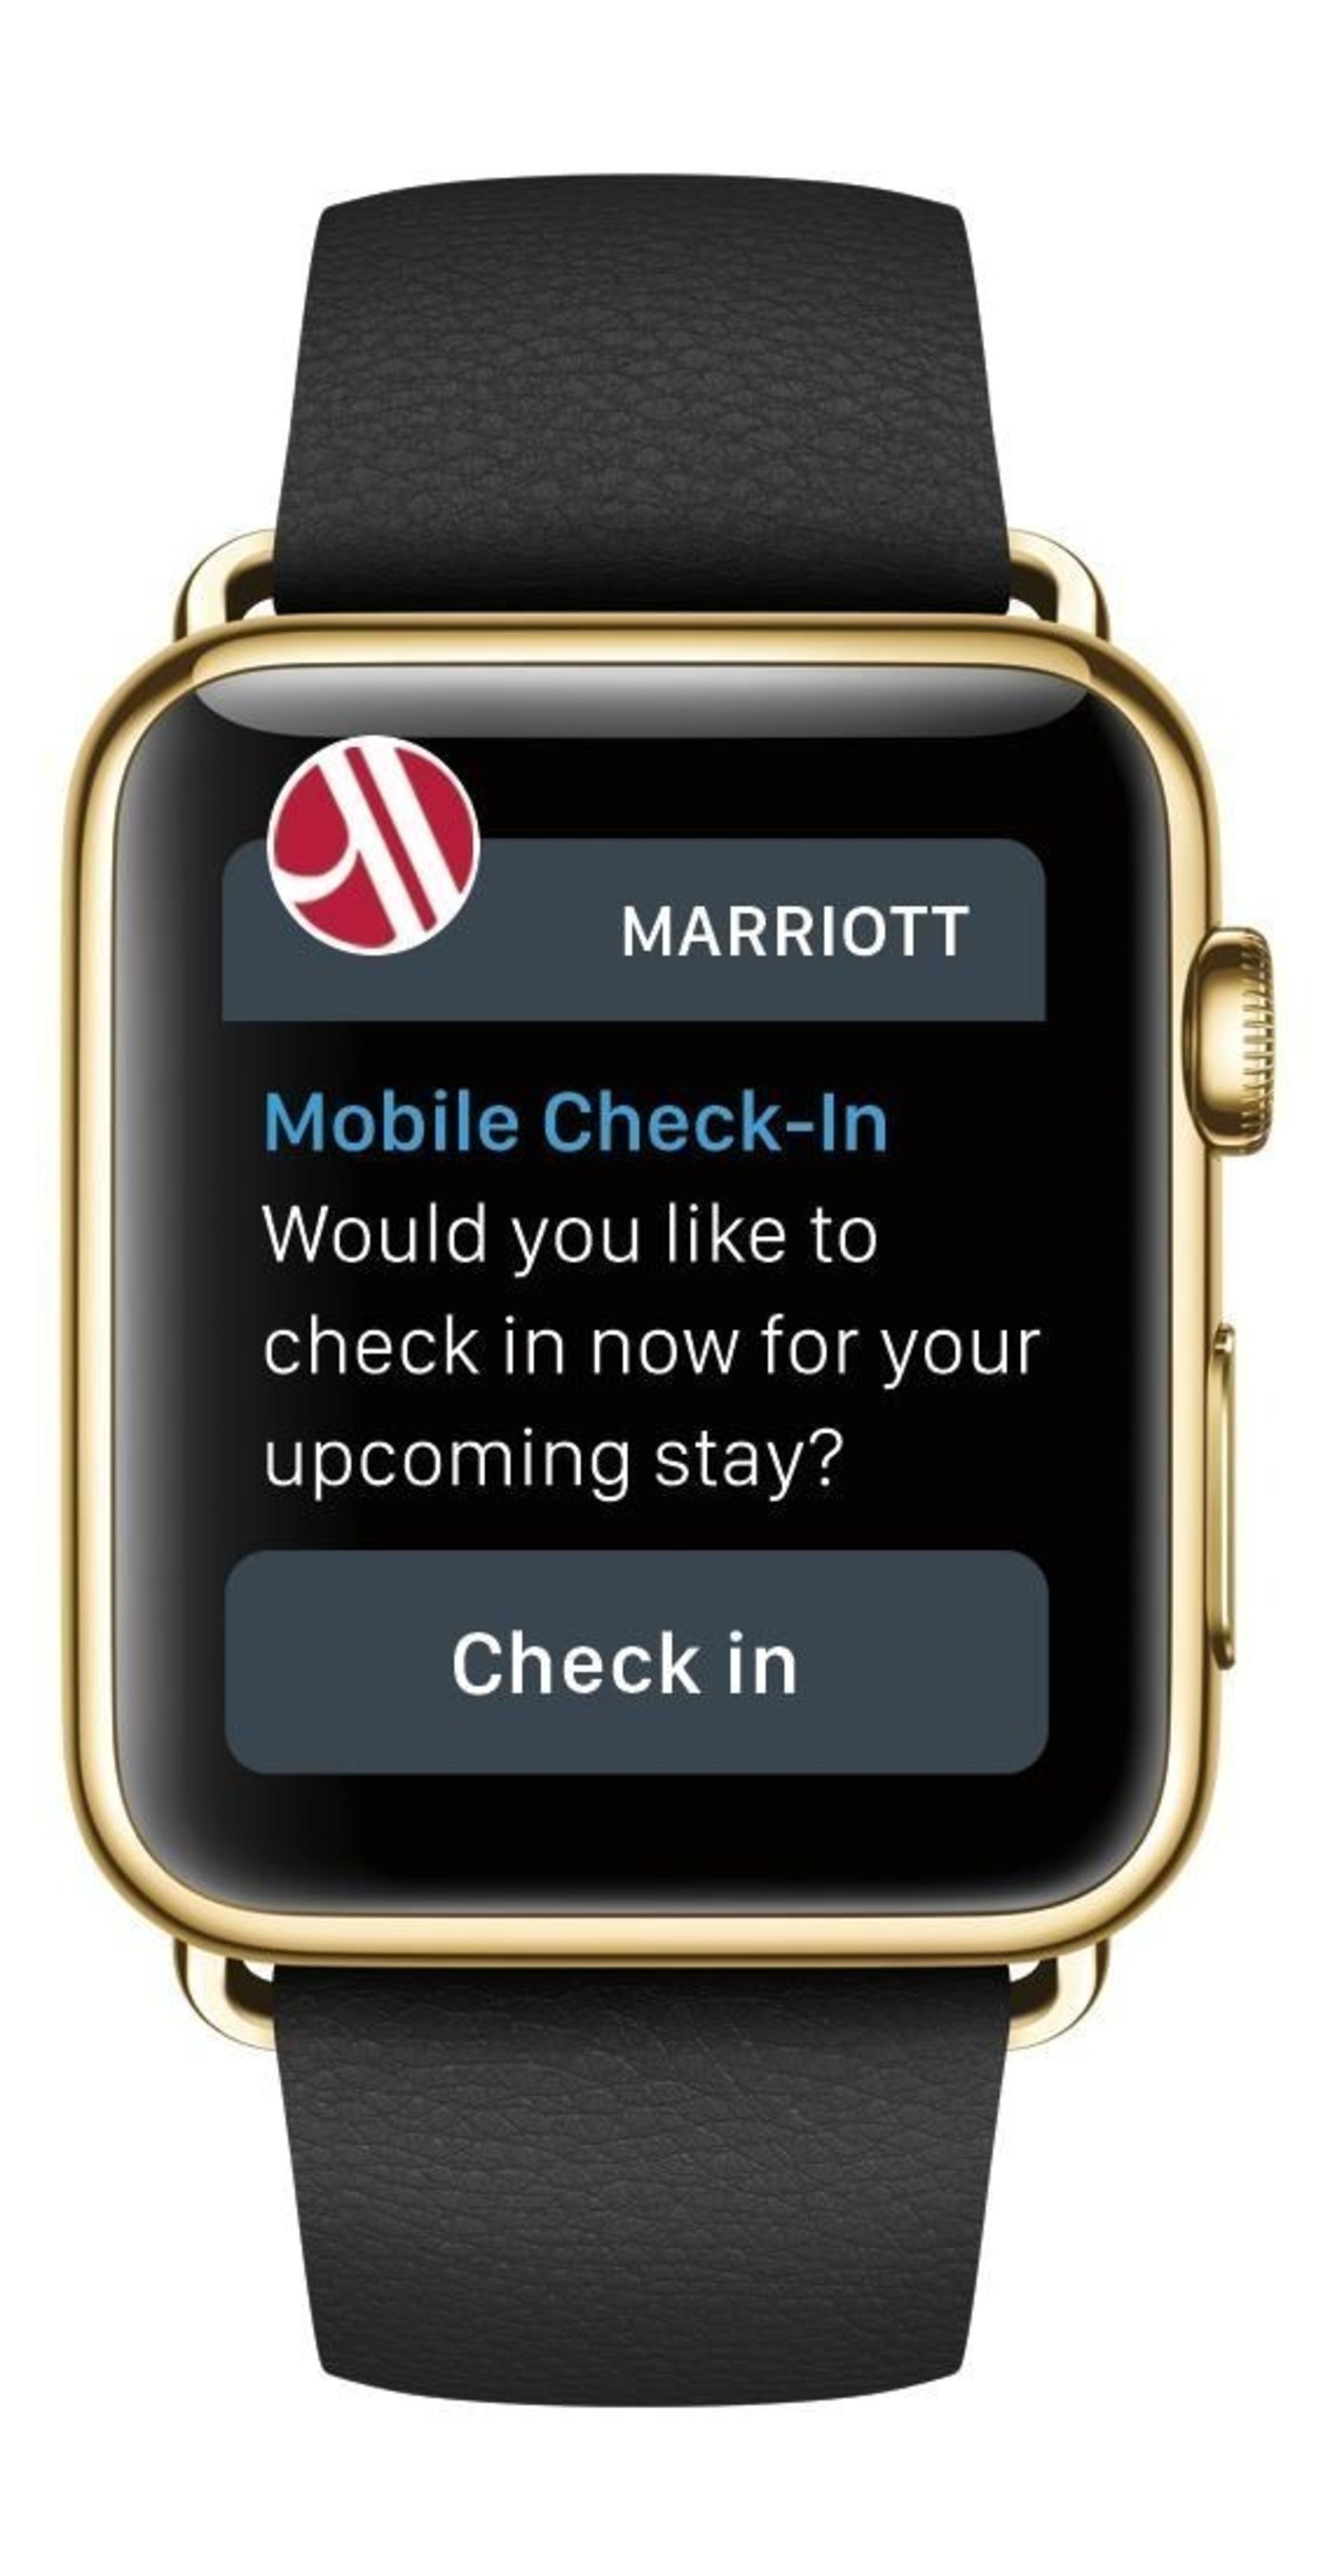 APPLE WATCH IS LATEST PERSONAL DEVICE TO FUEL MARRIOTT INTERNATIONAL'SMOBILE TRAVEL REVOLUTION